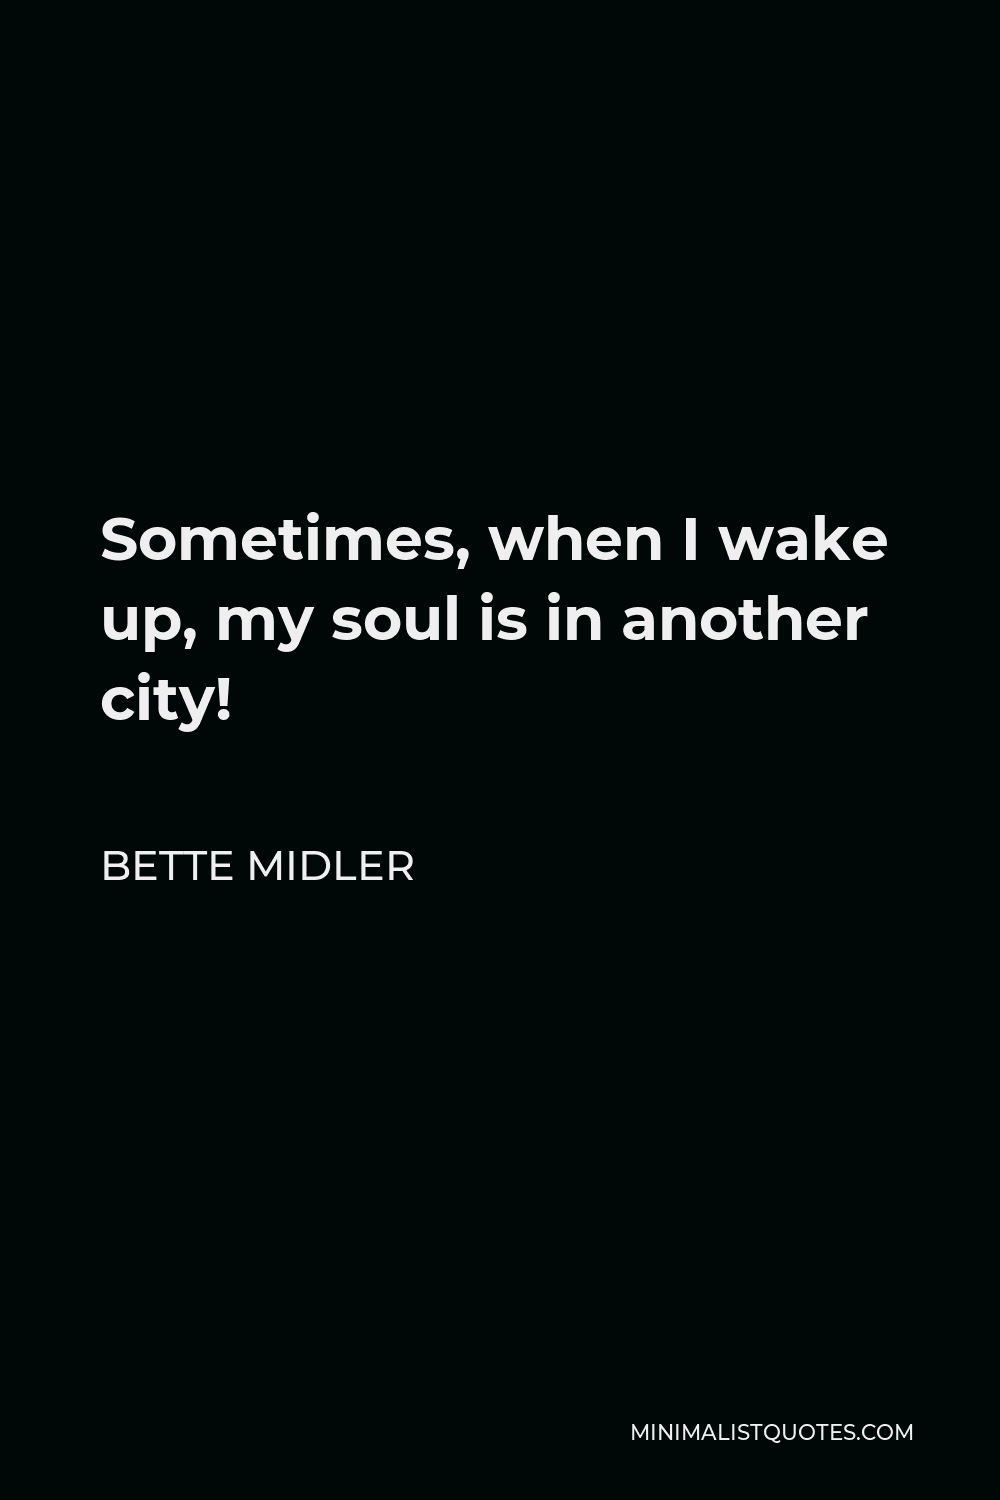 Bette Midler Quote - Sometimes, when I wake up, my soul is in another city!